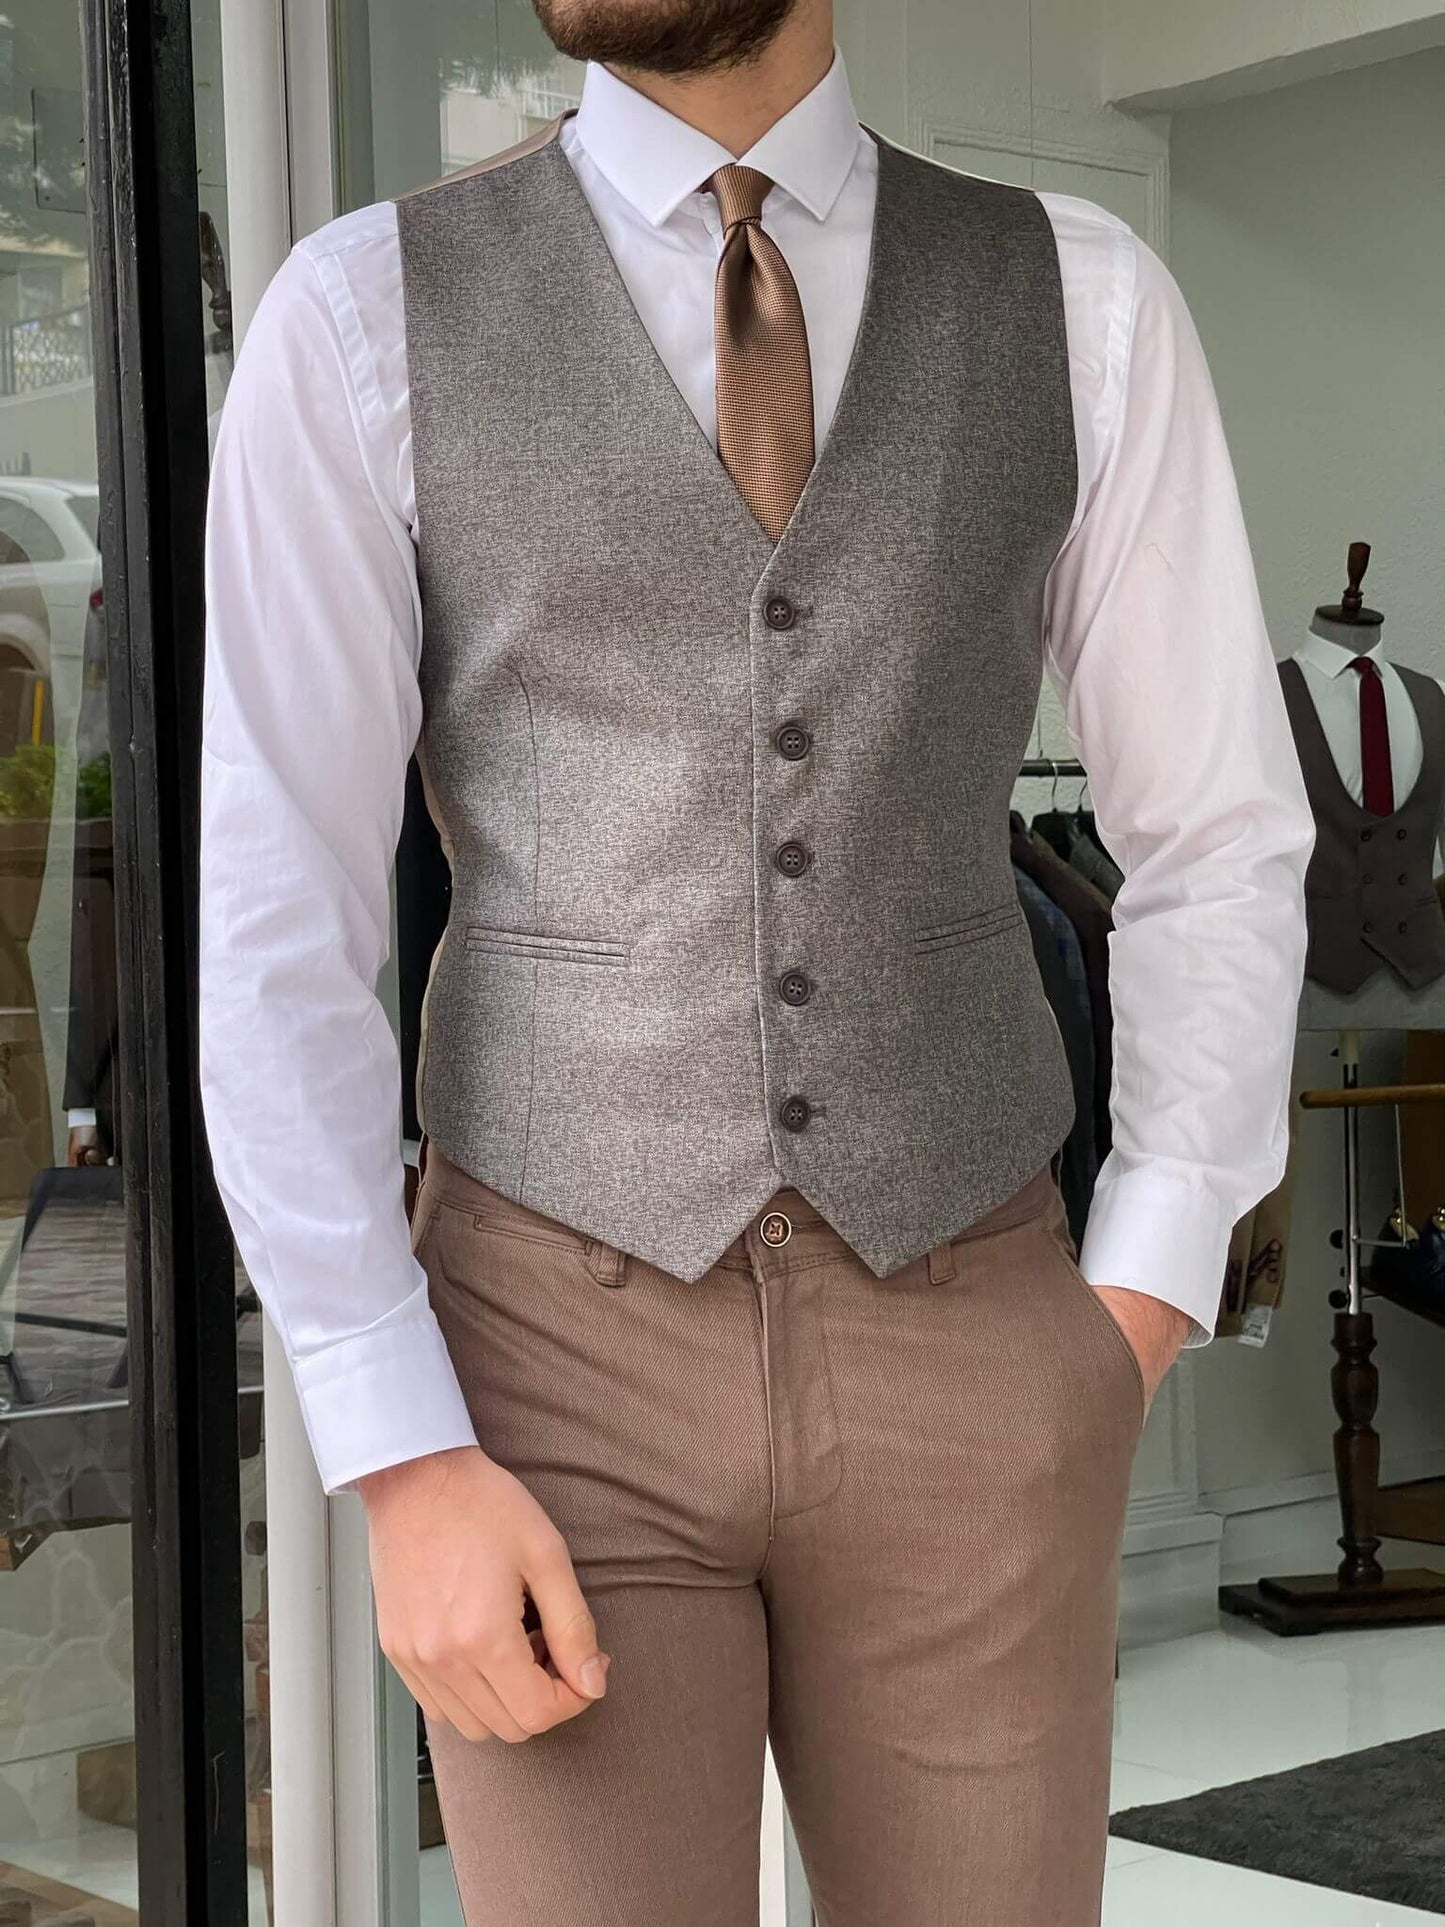 A close-up of a beige waistcoat with buttons and a V-neckline